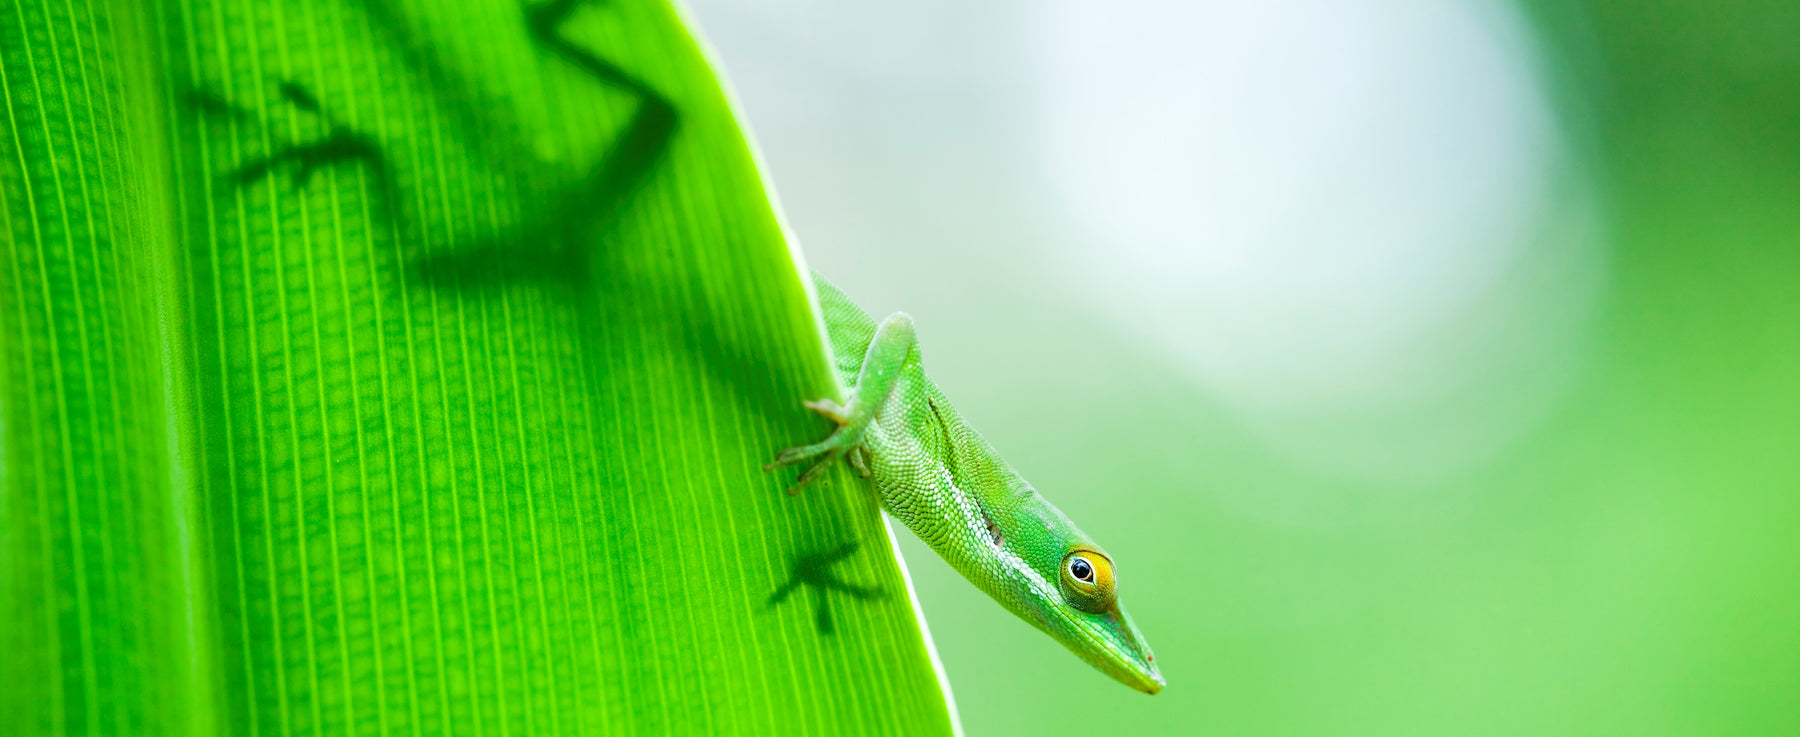 How to Care for Your Brown/Green Anole